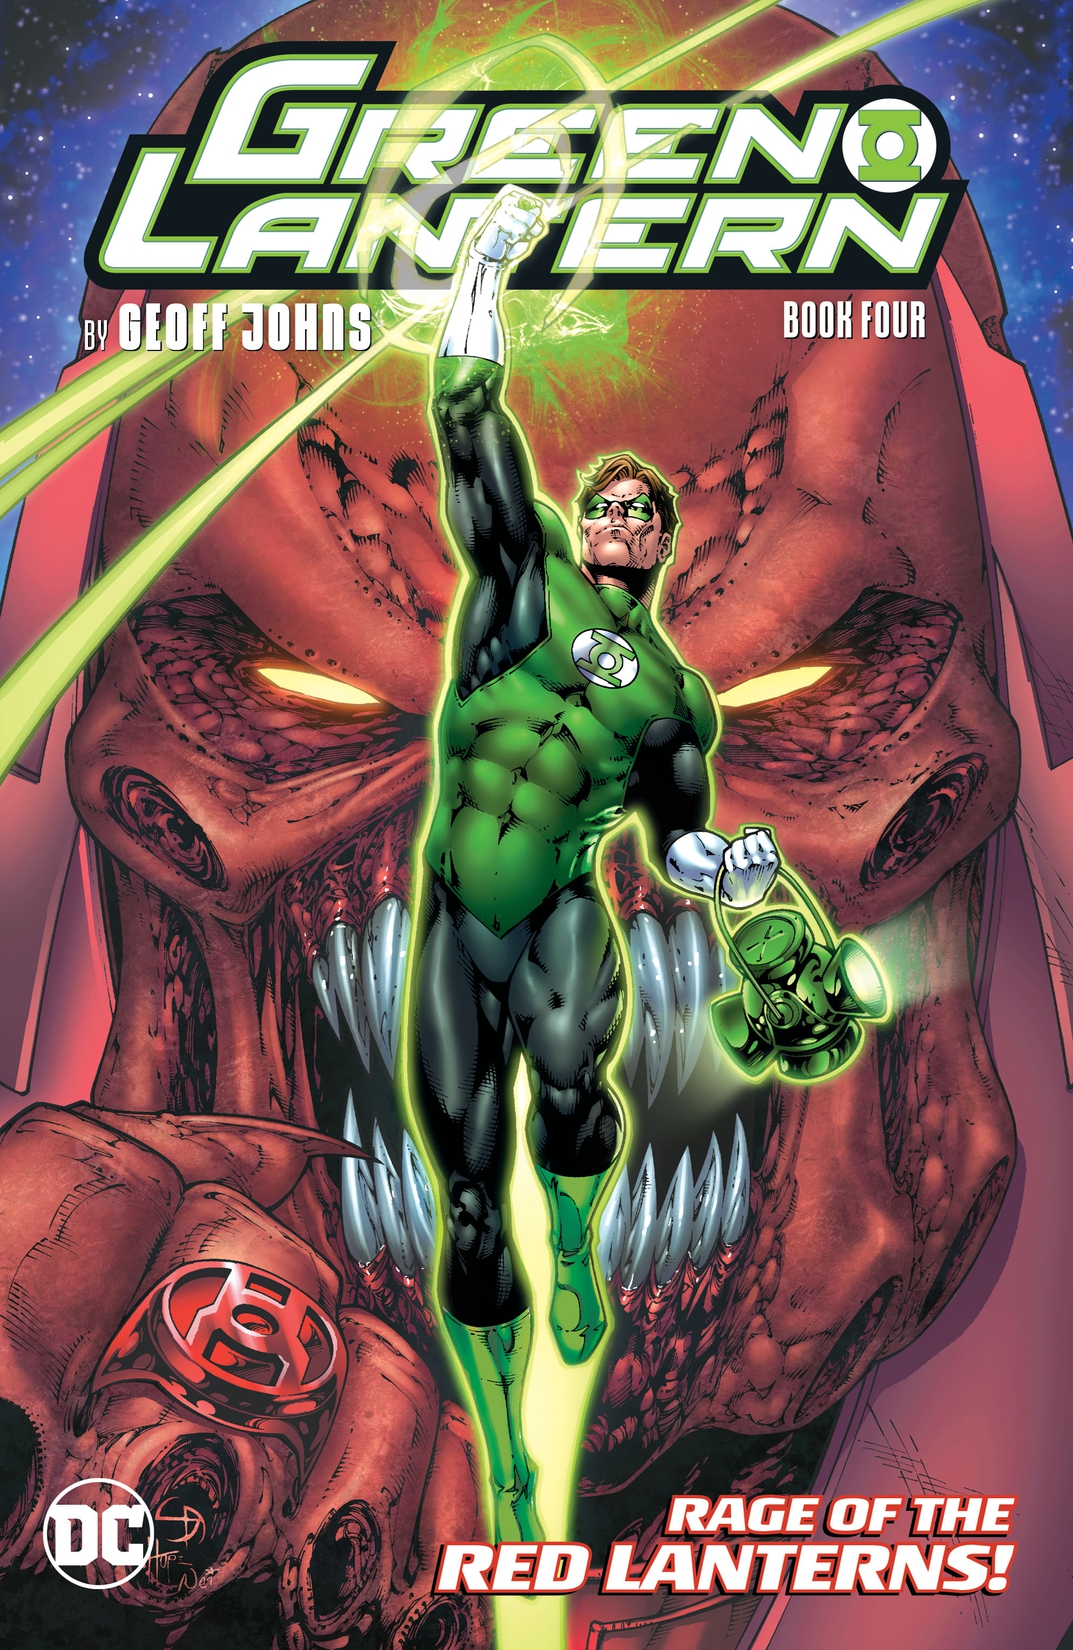 Green Lantern by Geoff Johns Book Four preview images